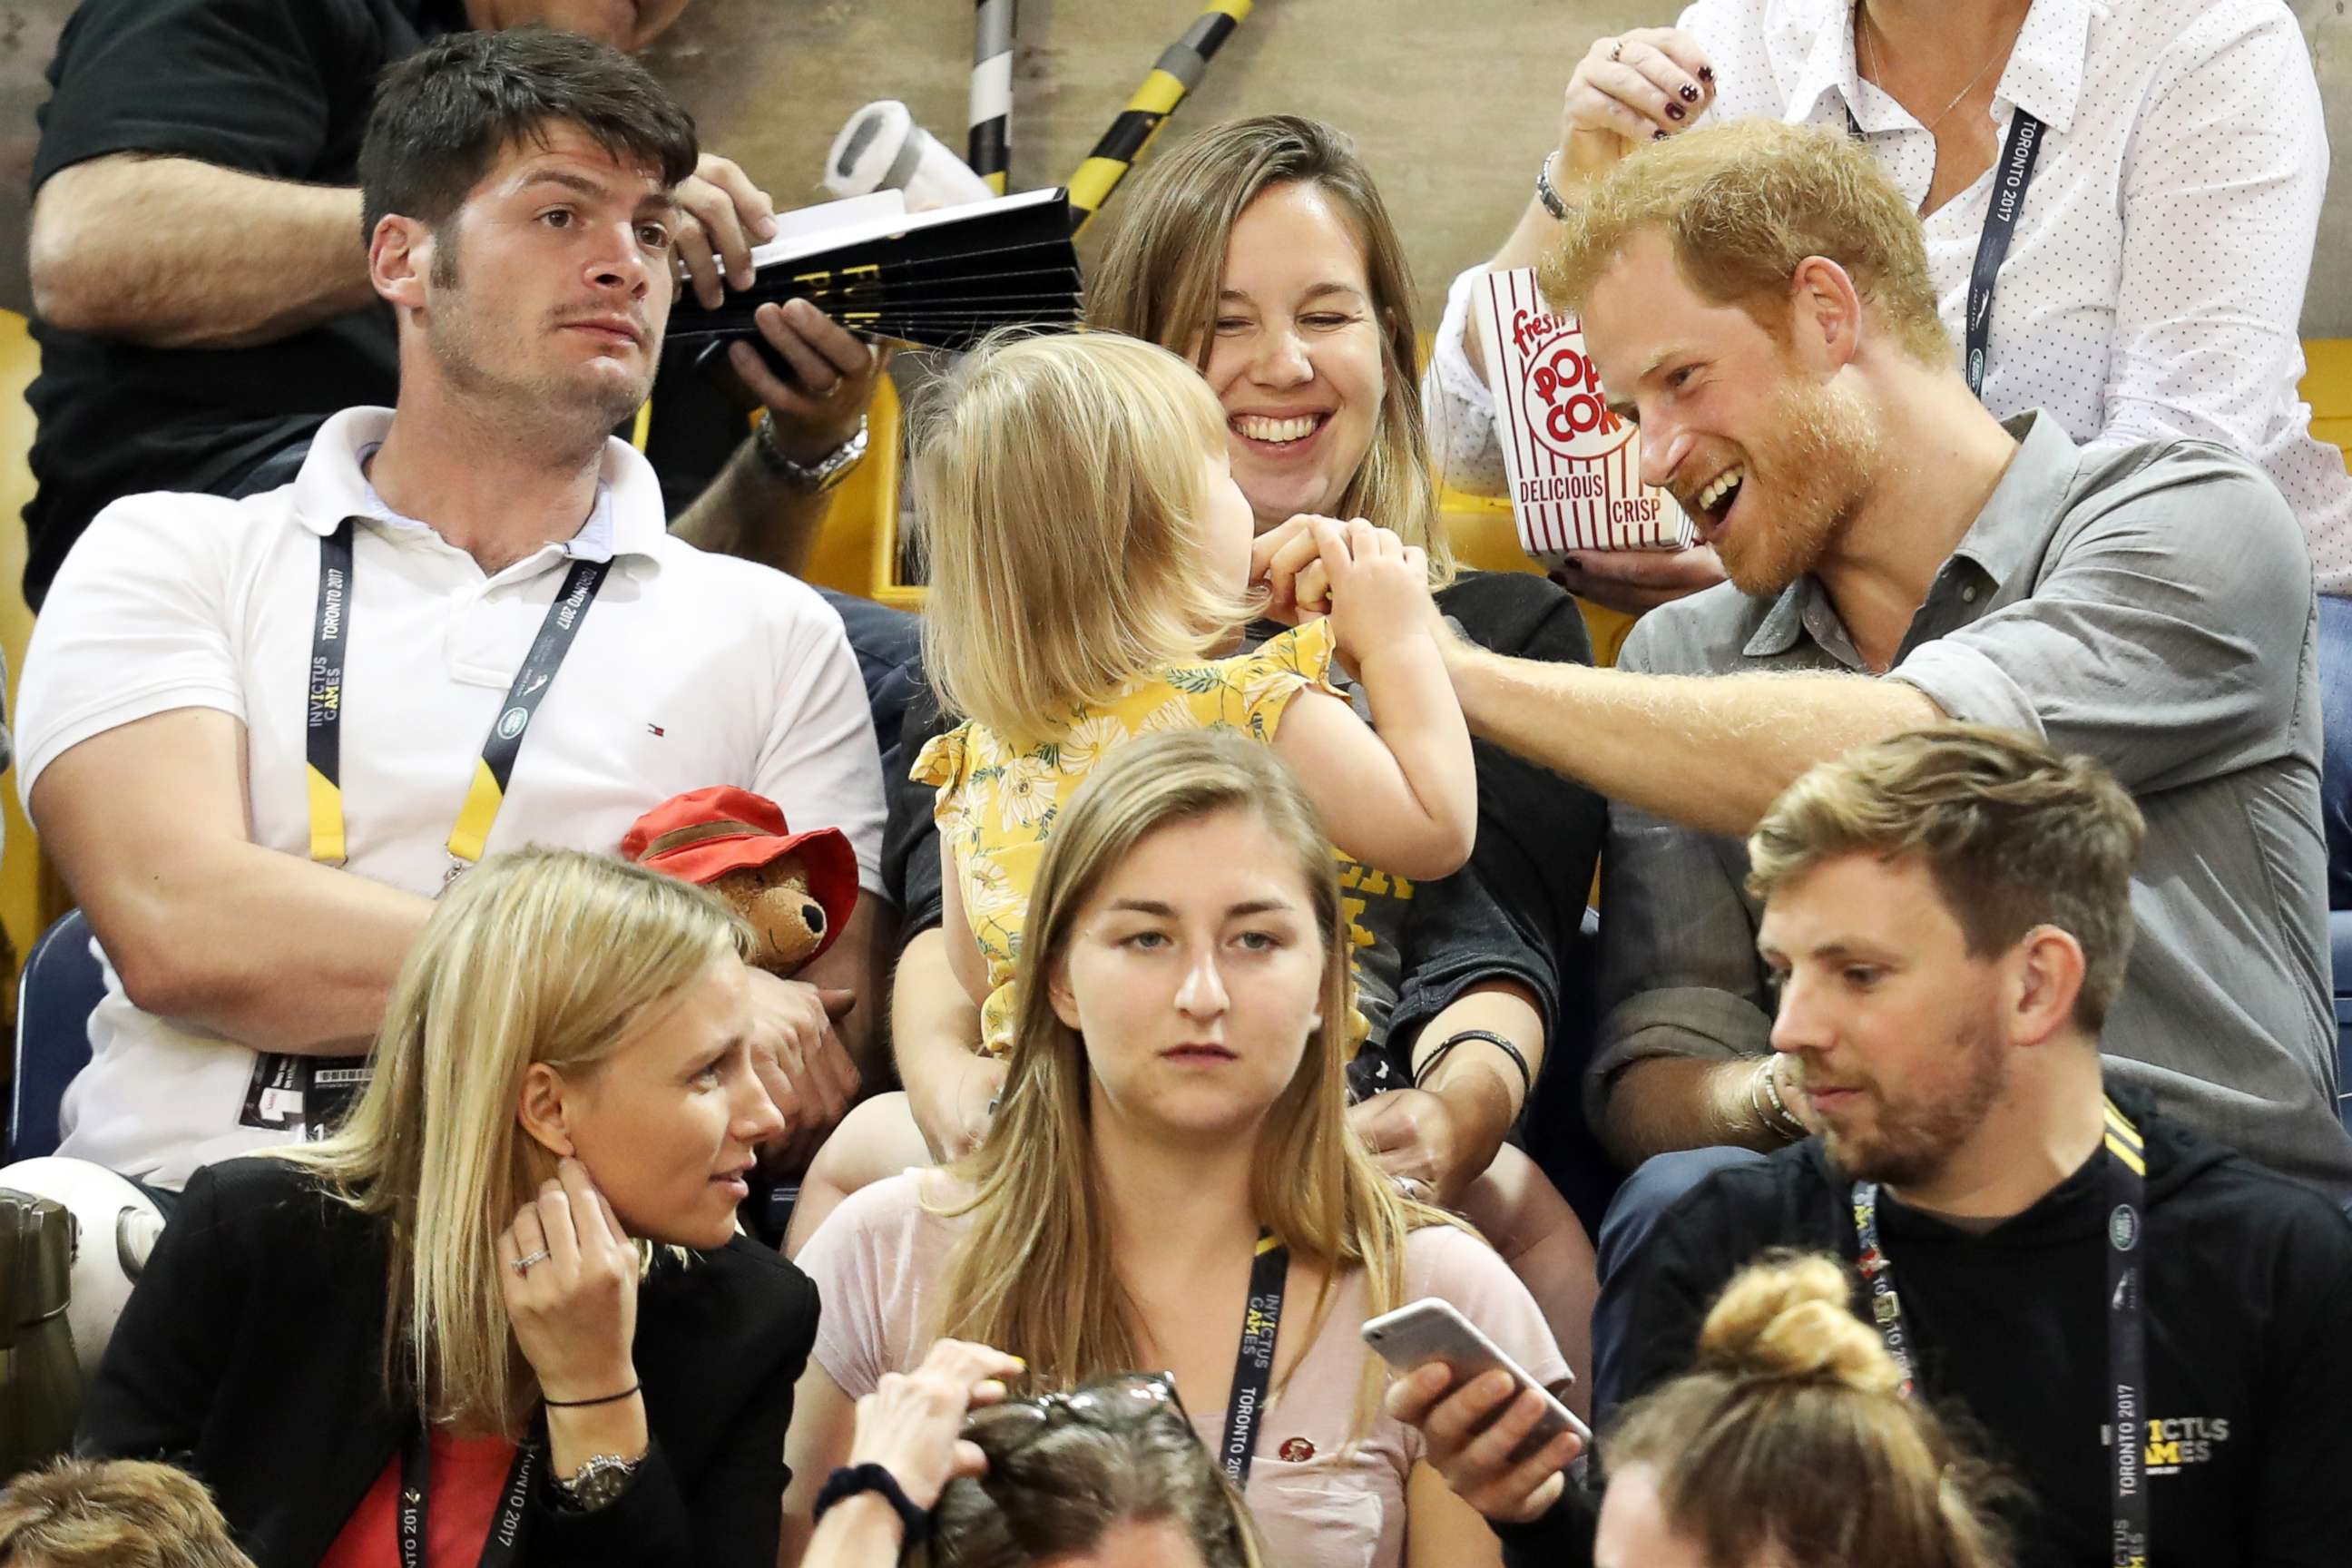 PHOTO: Athlete David Henson (L), wife Hayley Henson, and daughter Emily Henson sit with Prince Harry at the Sitting Volleyball Finals during the Invictus Games 2017 at Mattamy Athletic Center, Sept. 27, 2017 in Toronto.  